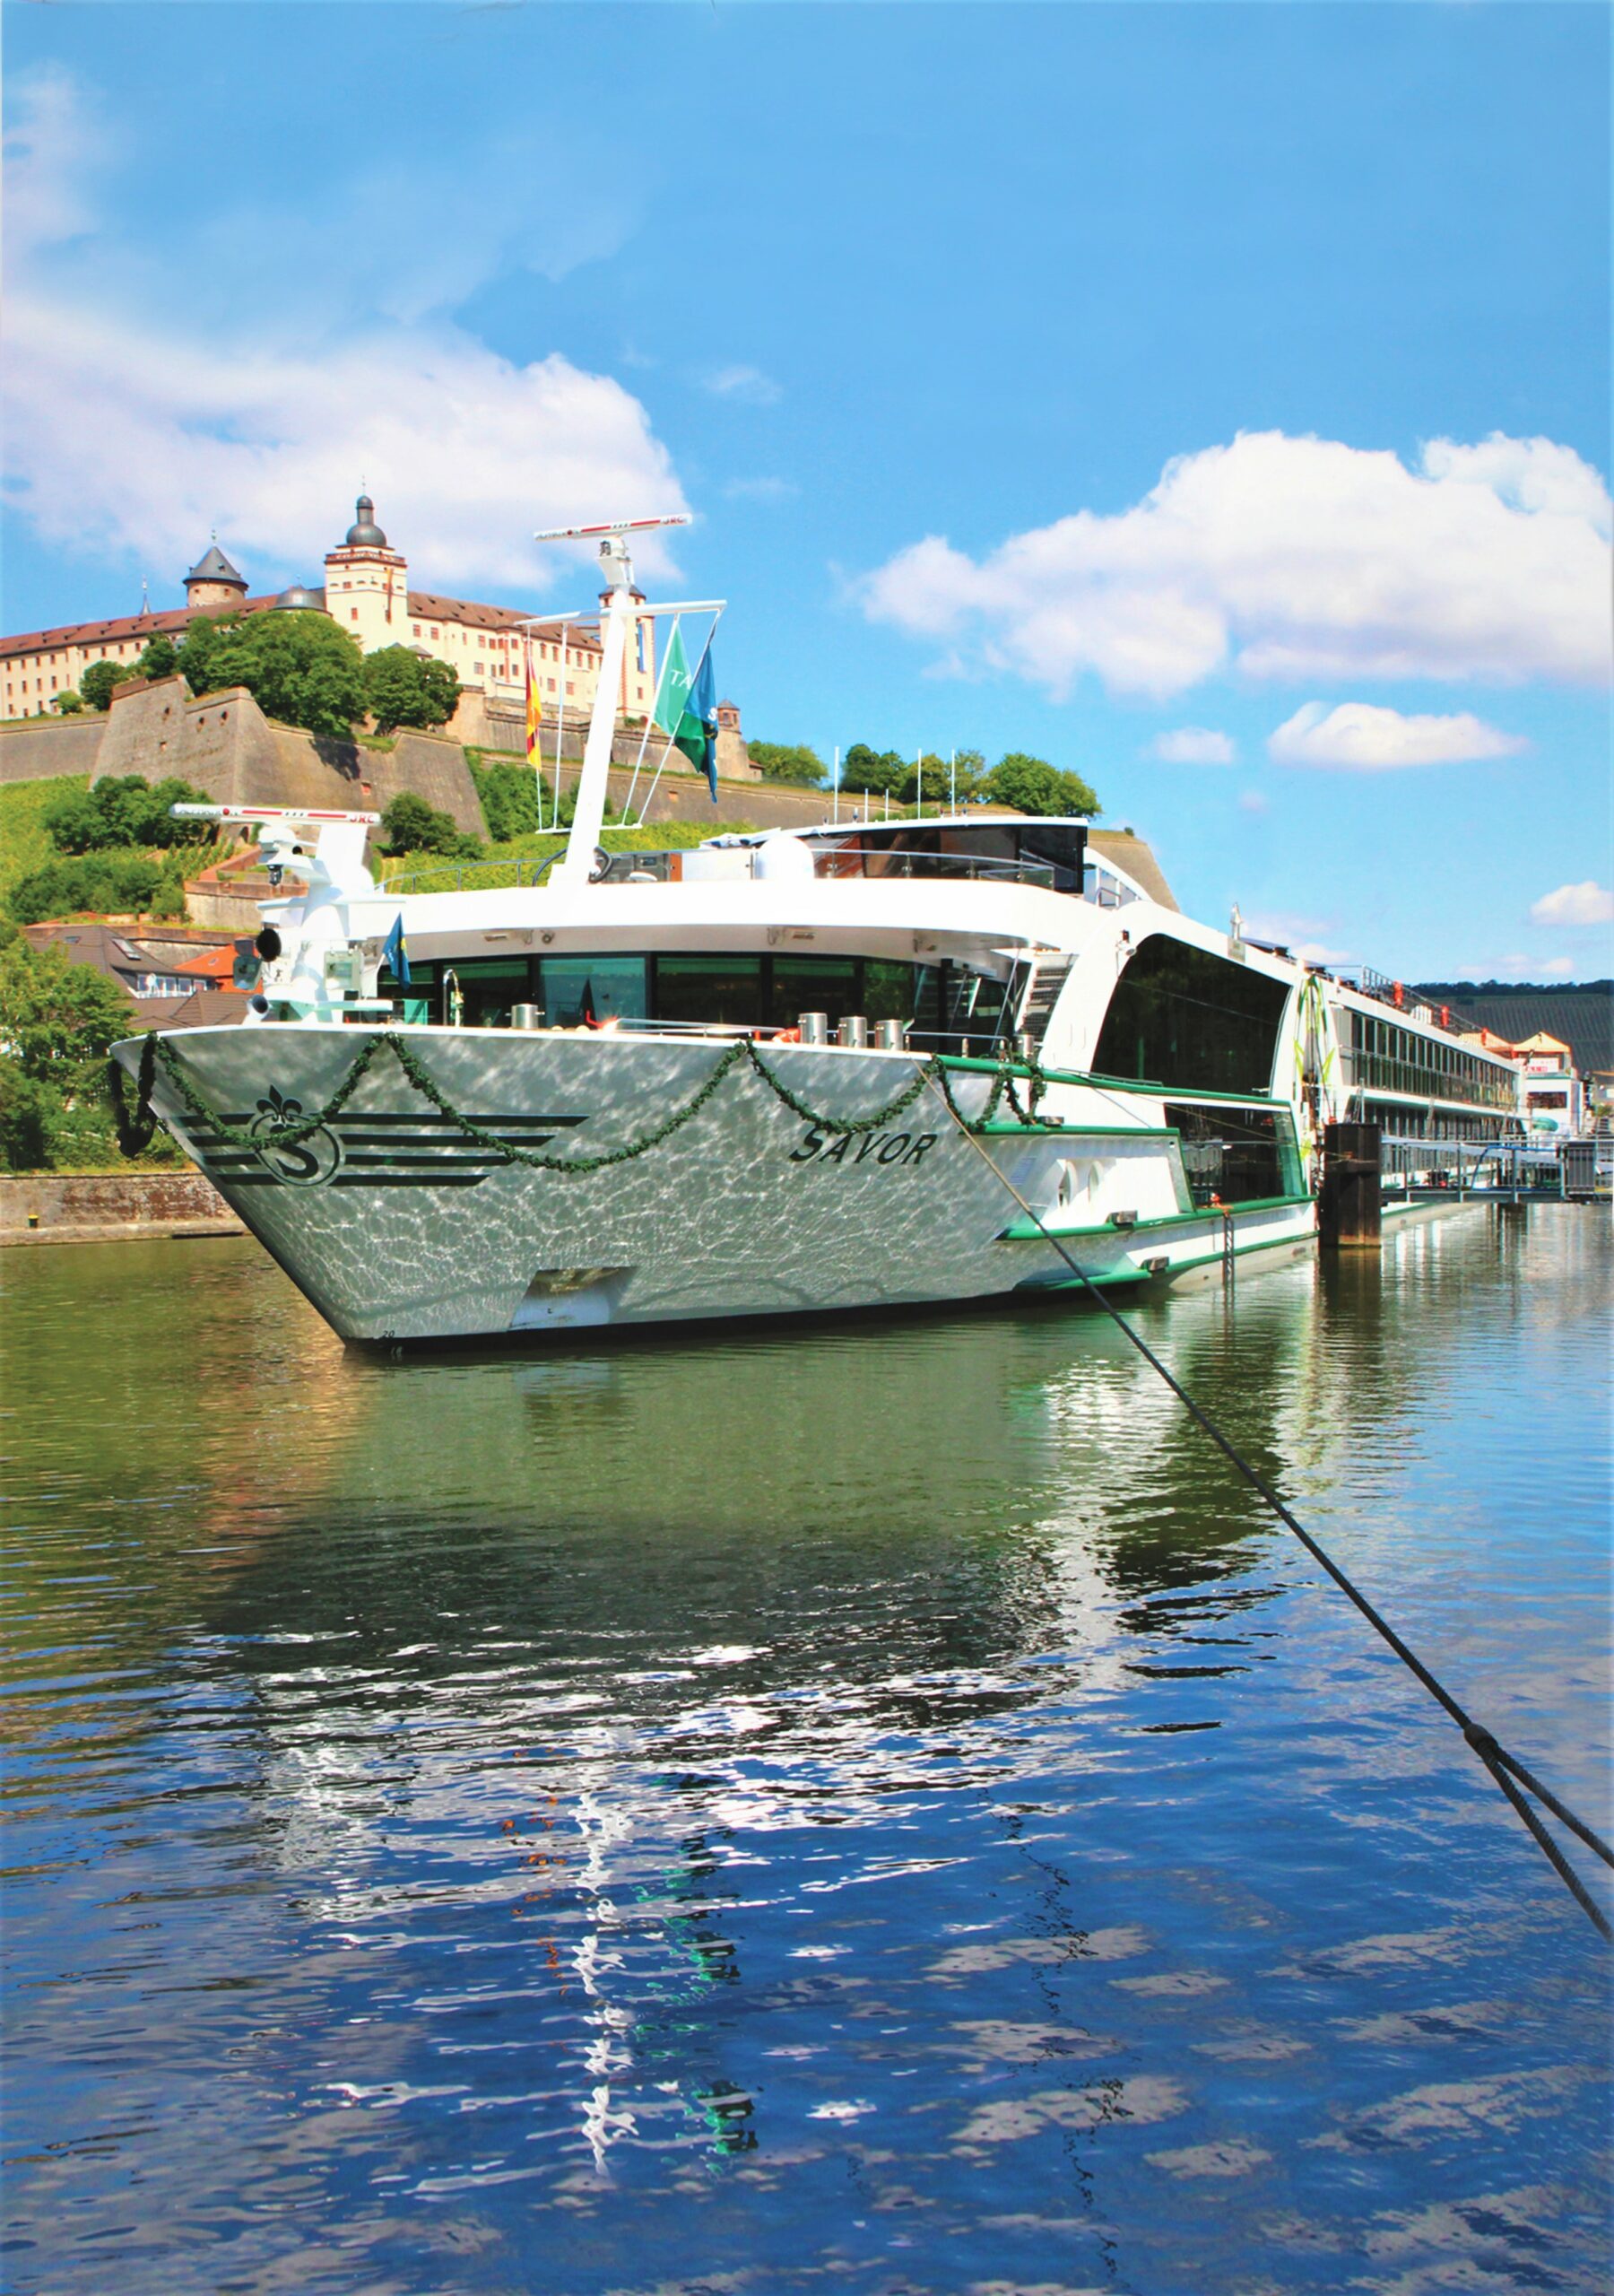 Tauck's Savor is shown in Wurzburg, Germany. Photo by Tauck.